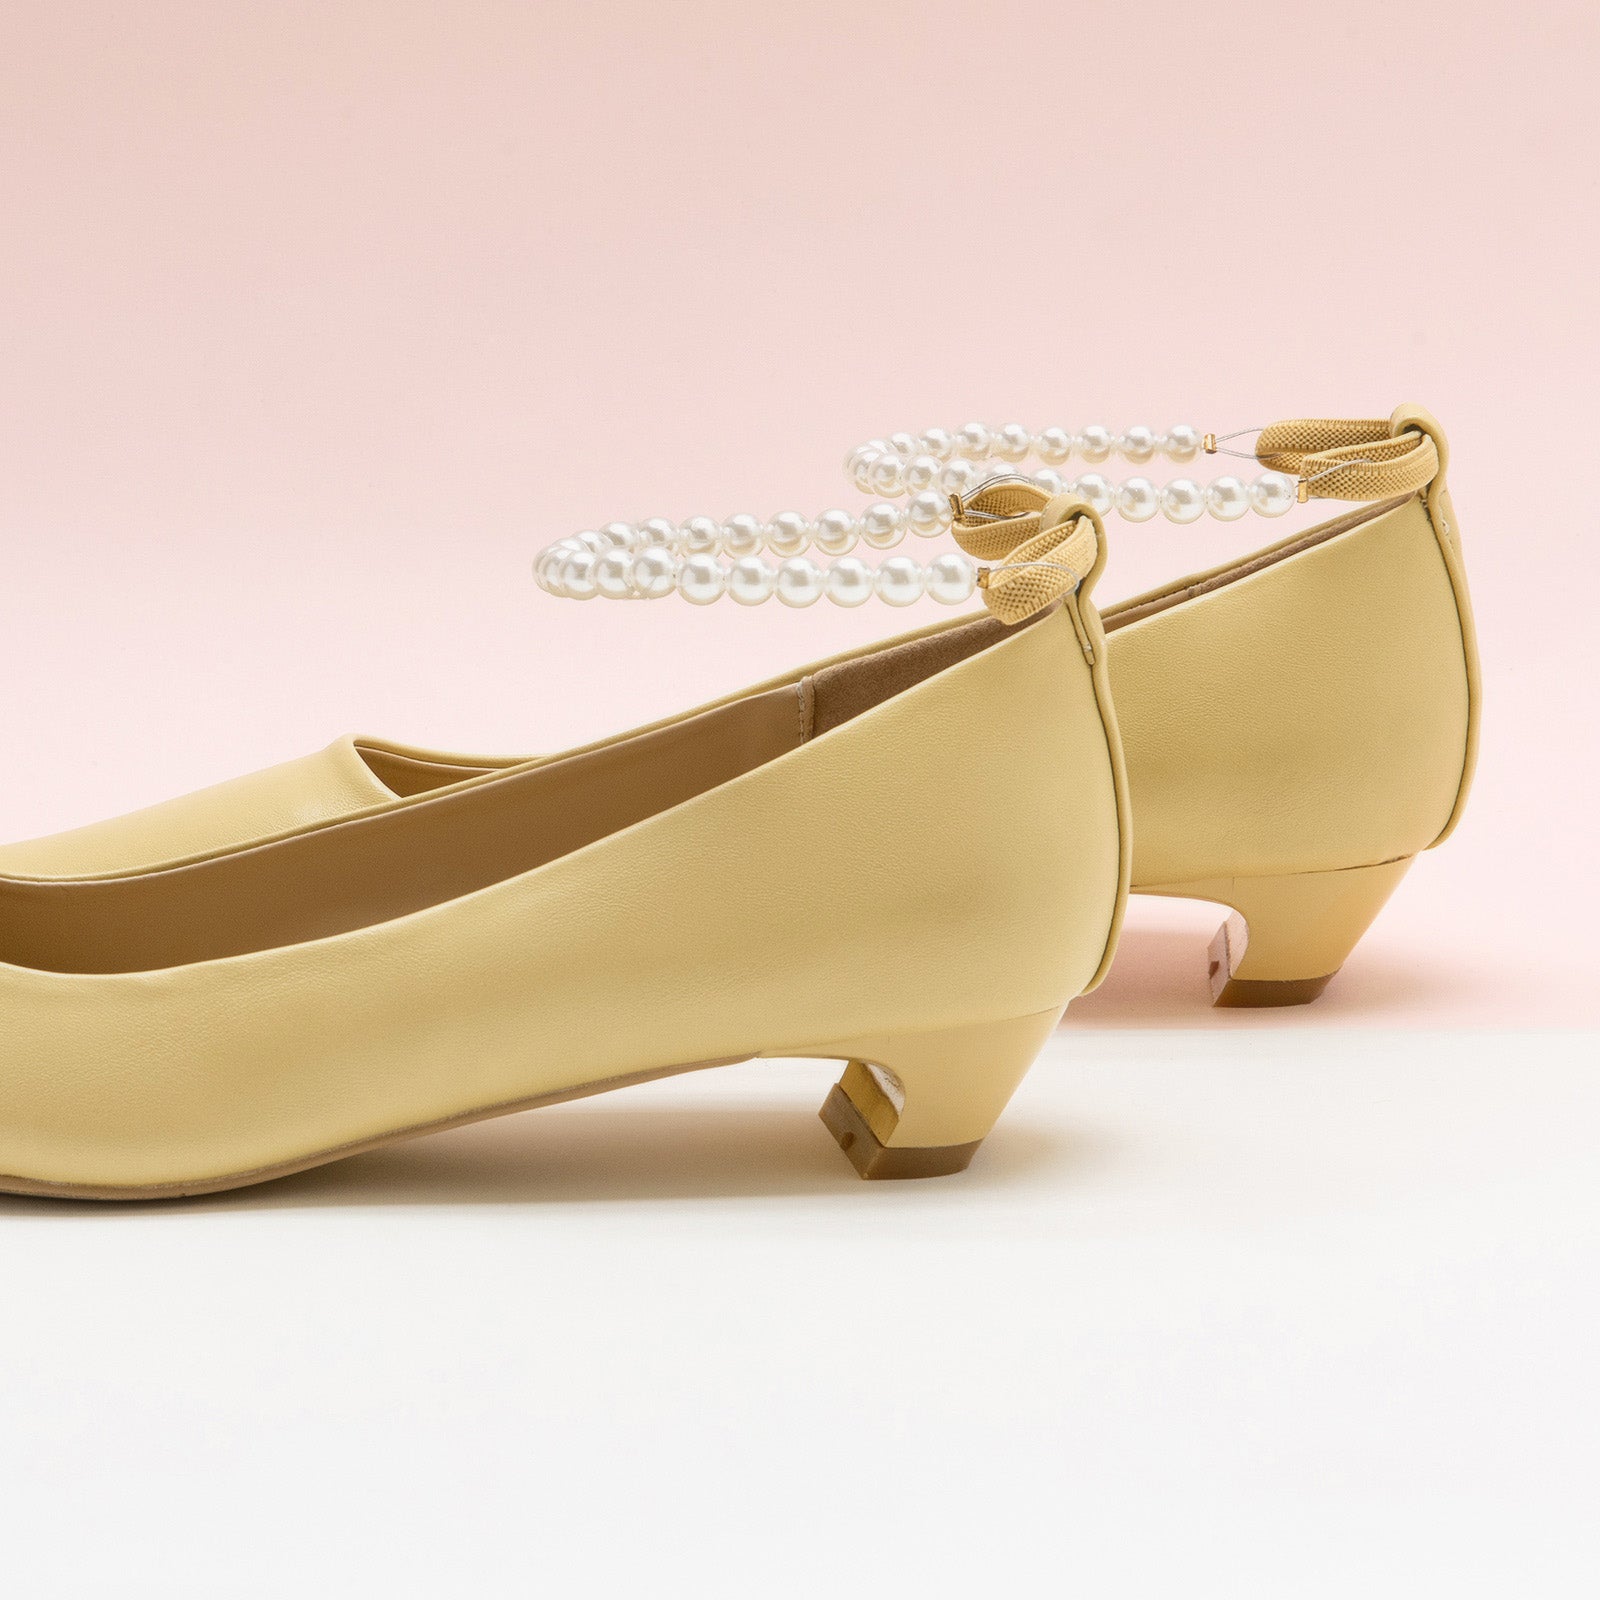 Pearl Straps Low Heel in Yellow, featuring delicate pearl details for a polished and radiant style